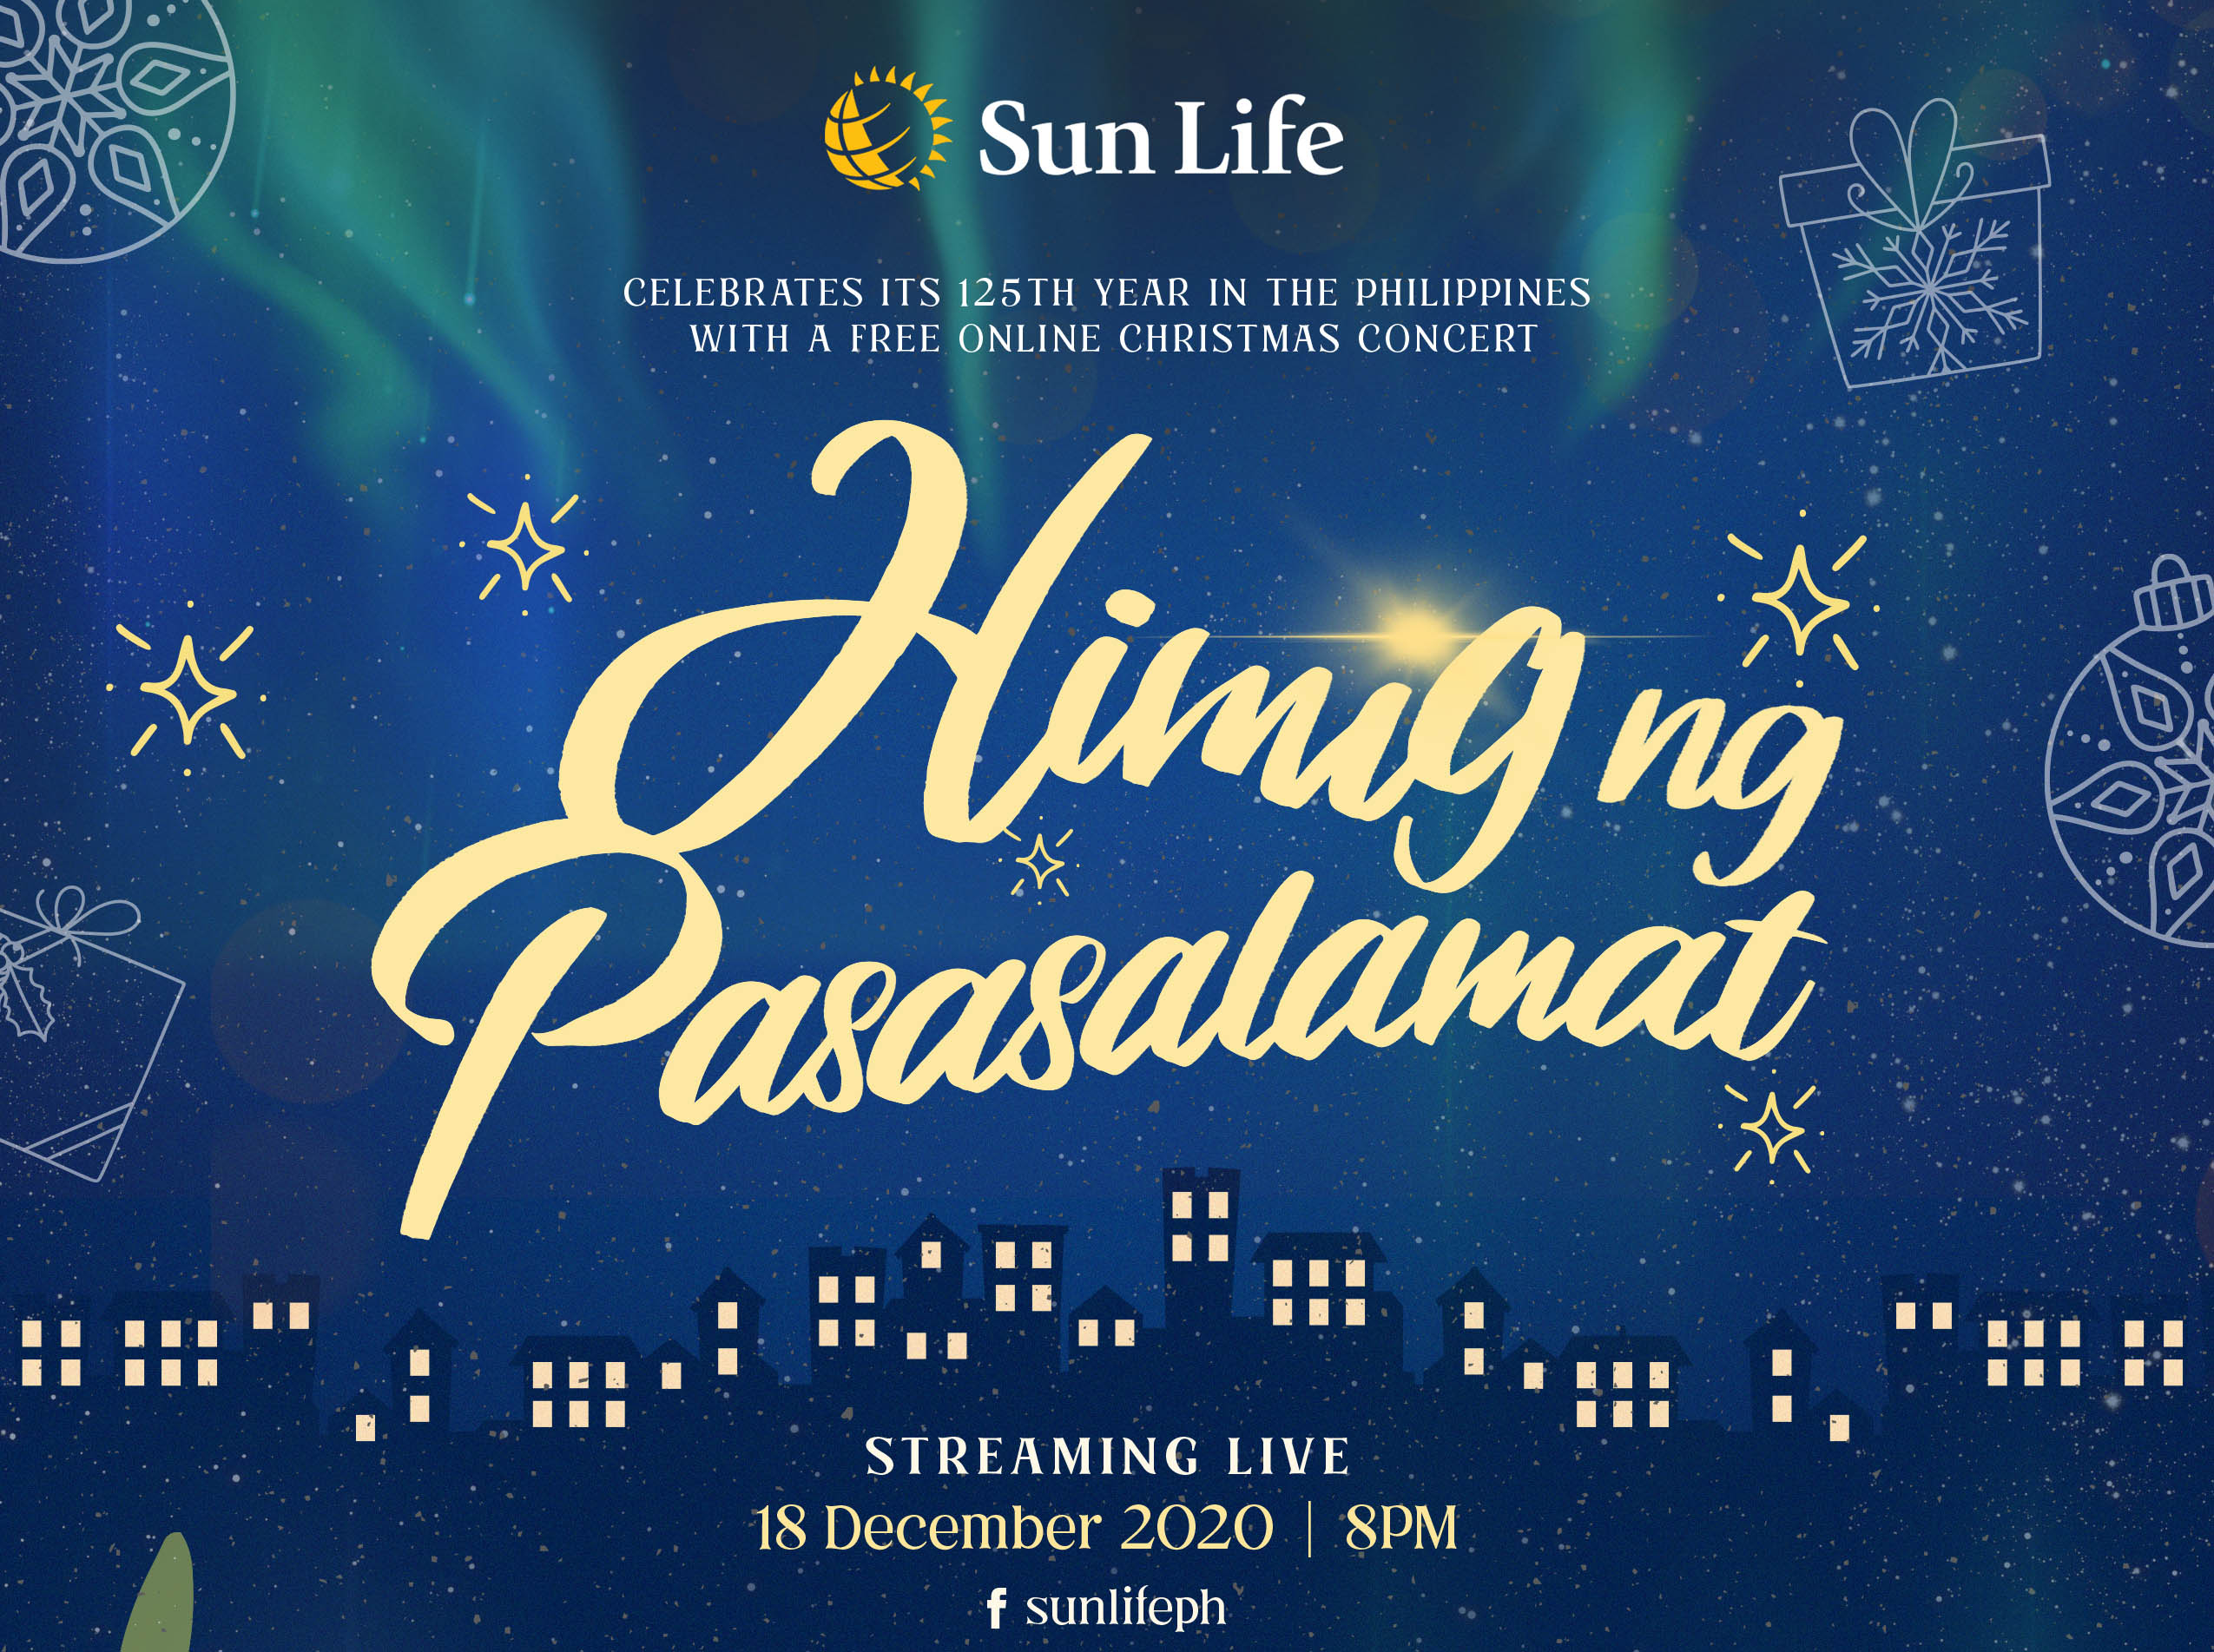 sun-life-concludes-125th-anniversary-with-himig-ng-pasasalamat-4eaturing-ben-ben-and-the